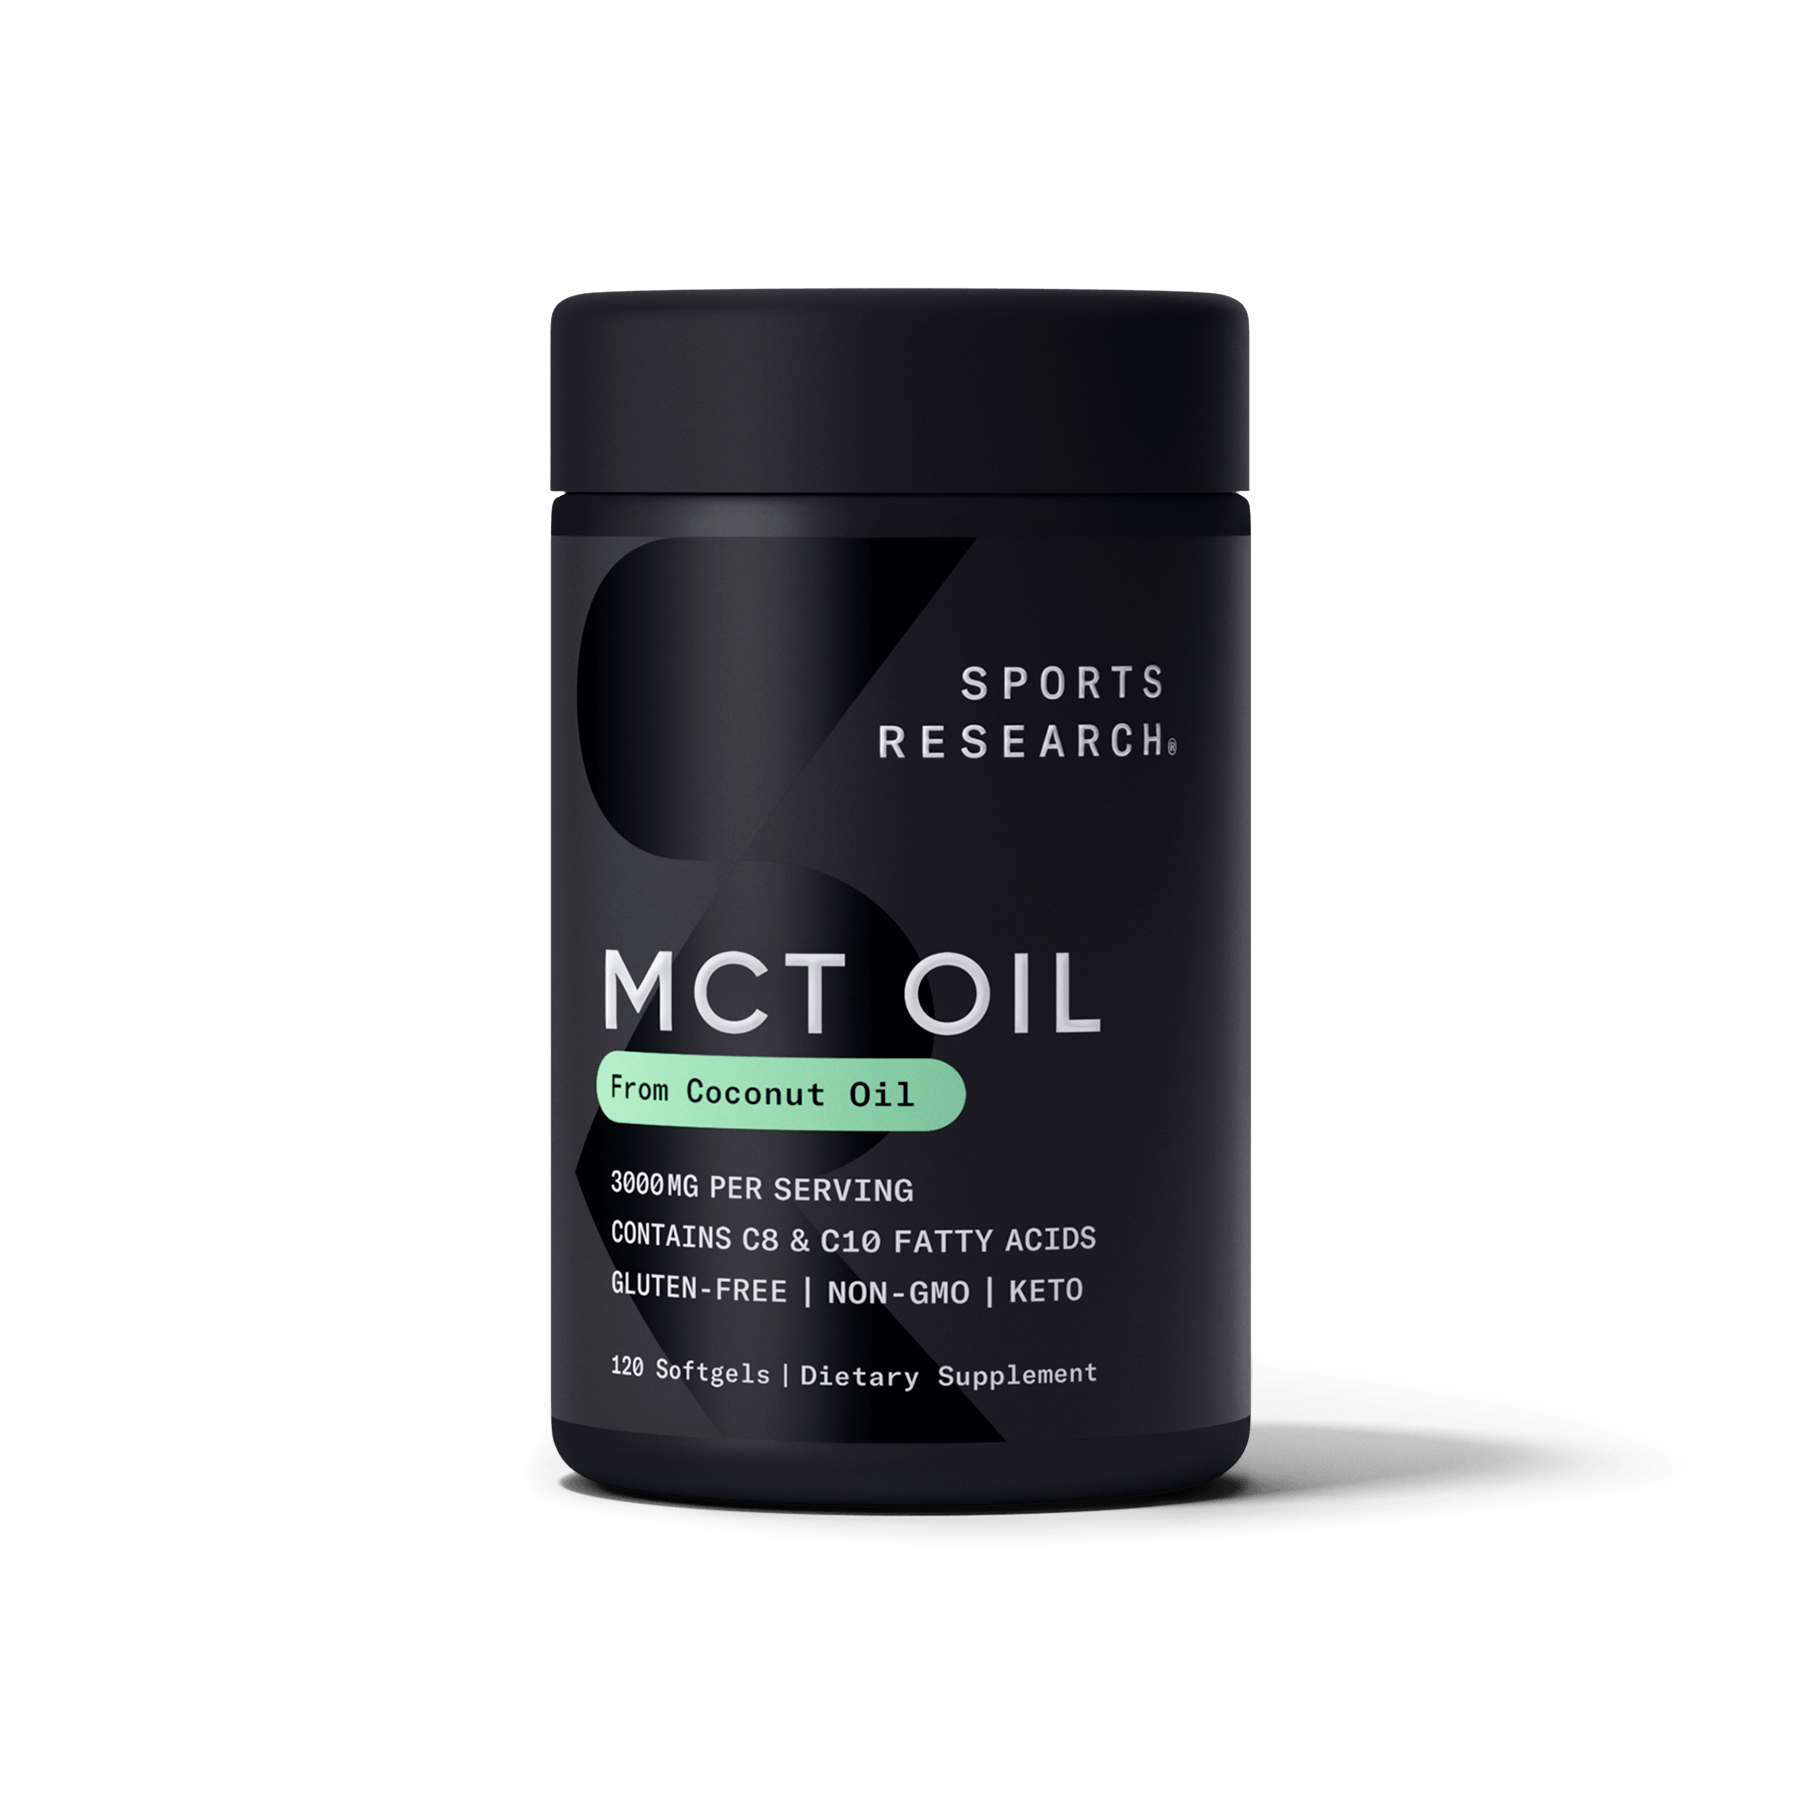 Organic MCT Oil 40 Fl oz. Bottle Sports Research Keto Fuel Unflavored  Coconut 23249012955